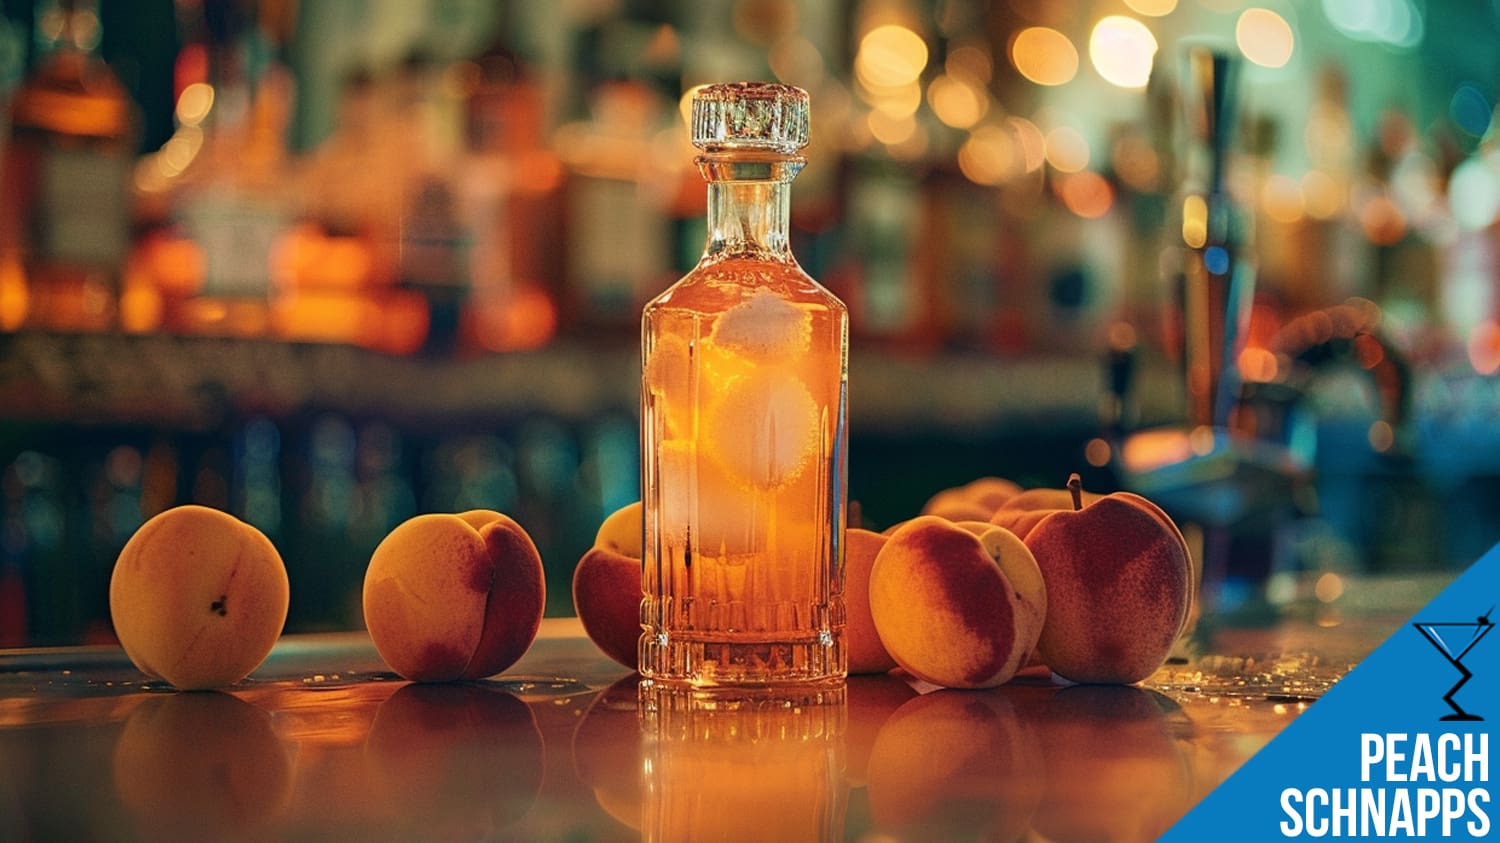 Best Peach Schnapps Cocktails: Recipes, Flavors, and Top Brands